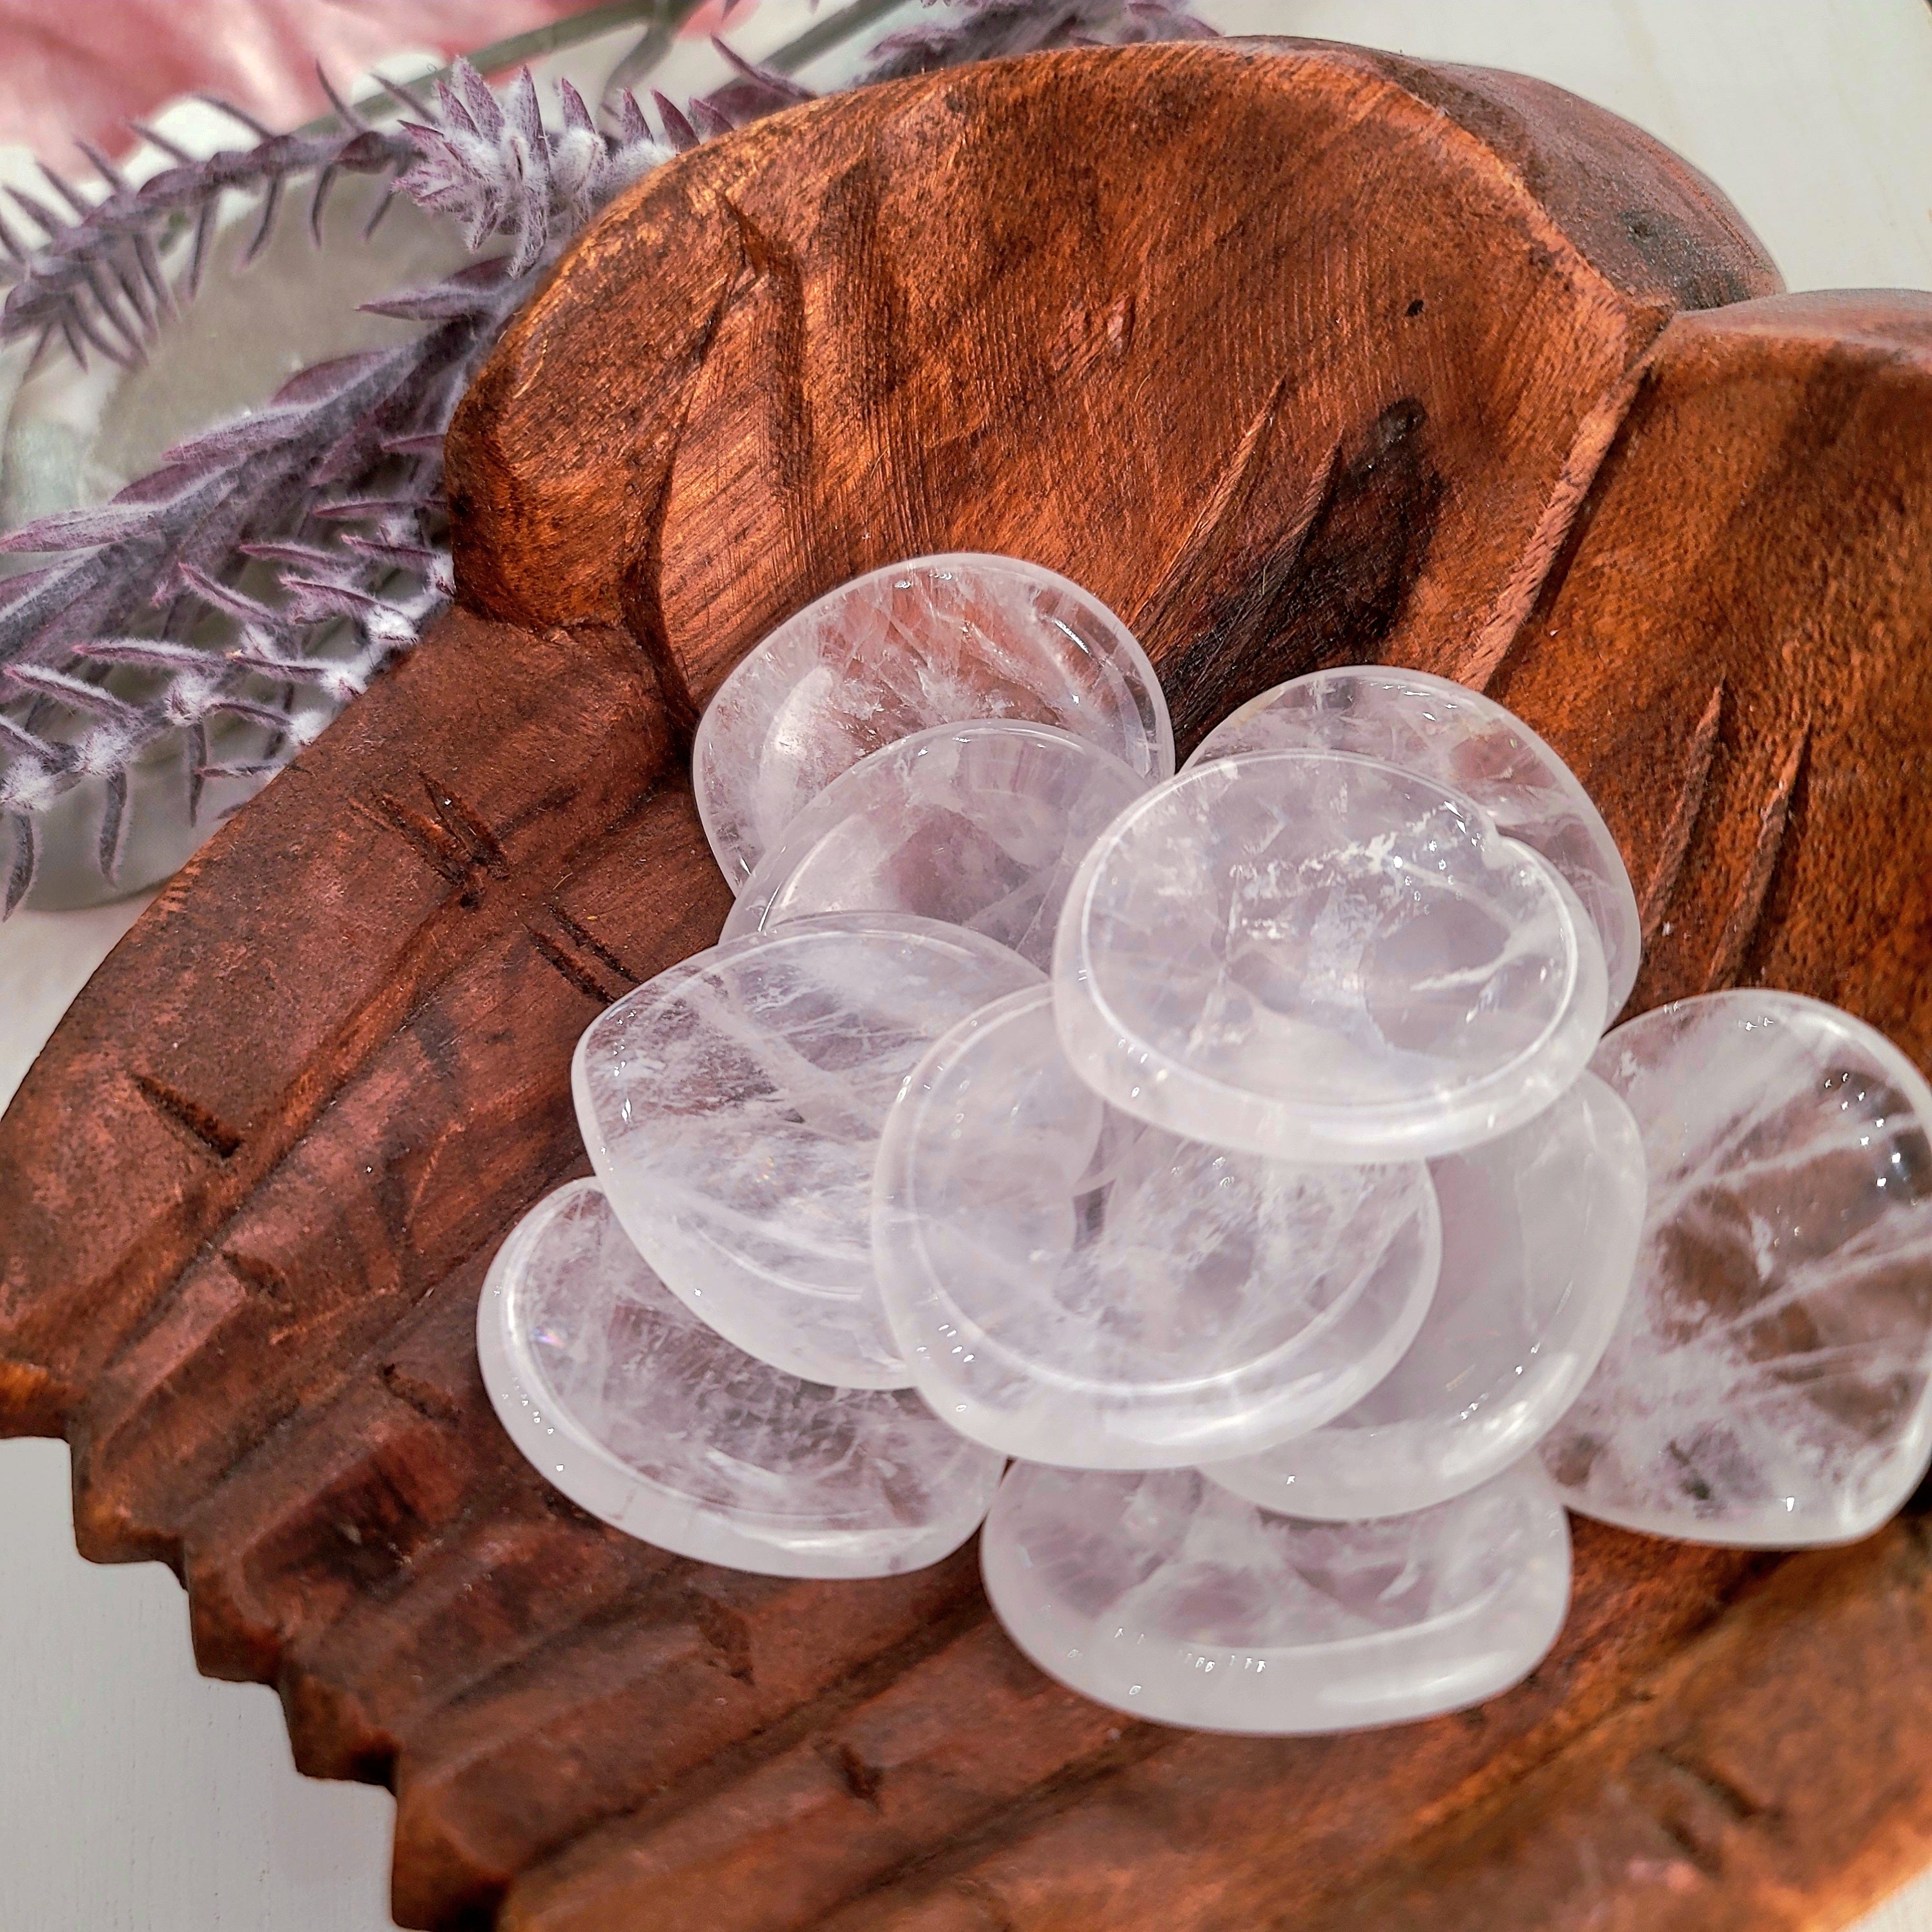 Clear Quartz Heart Worry Stone for Healing, Manifesting and Setting Intentions